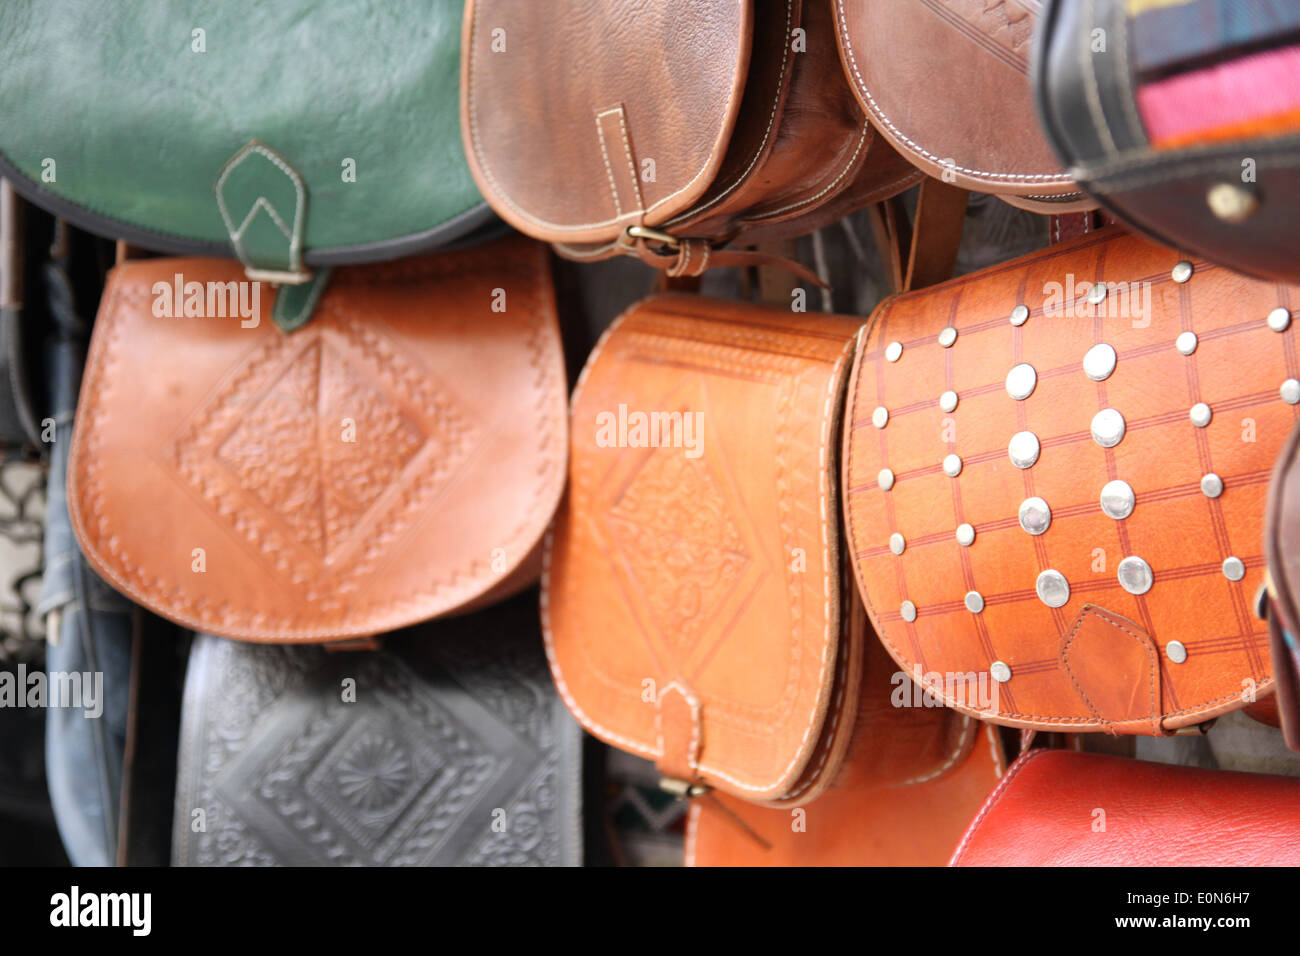 leather handbags for sale in a shop in Morocco Stock Photo